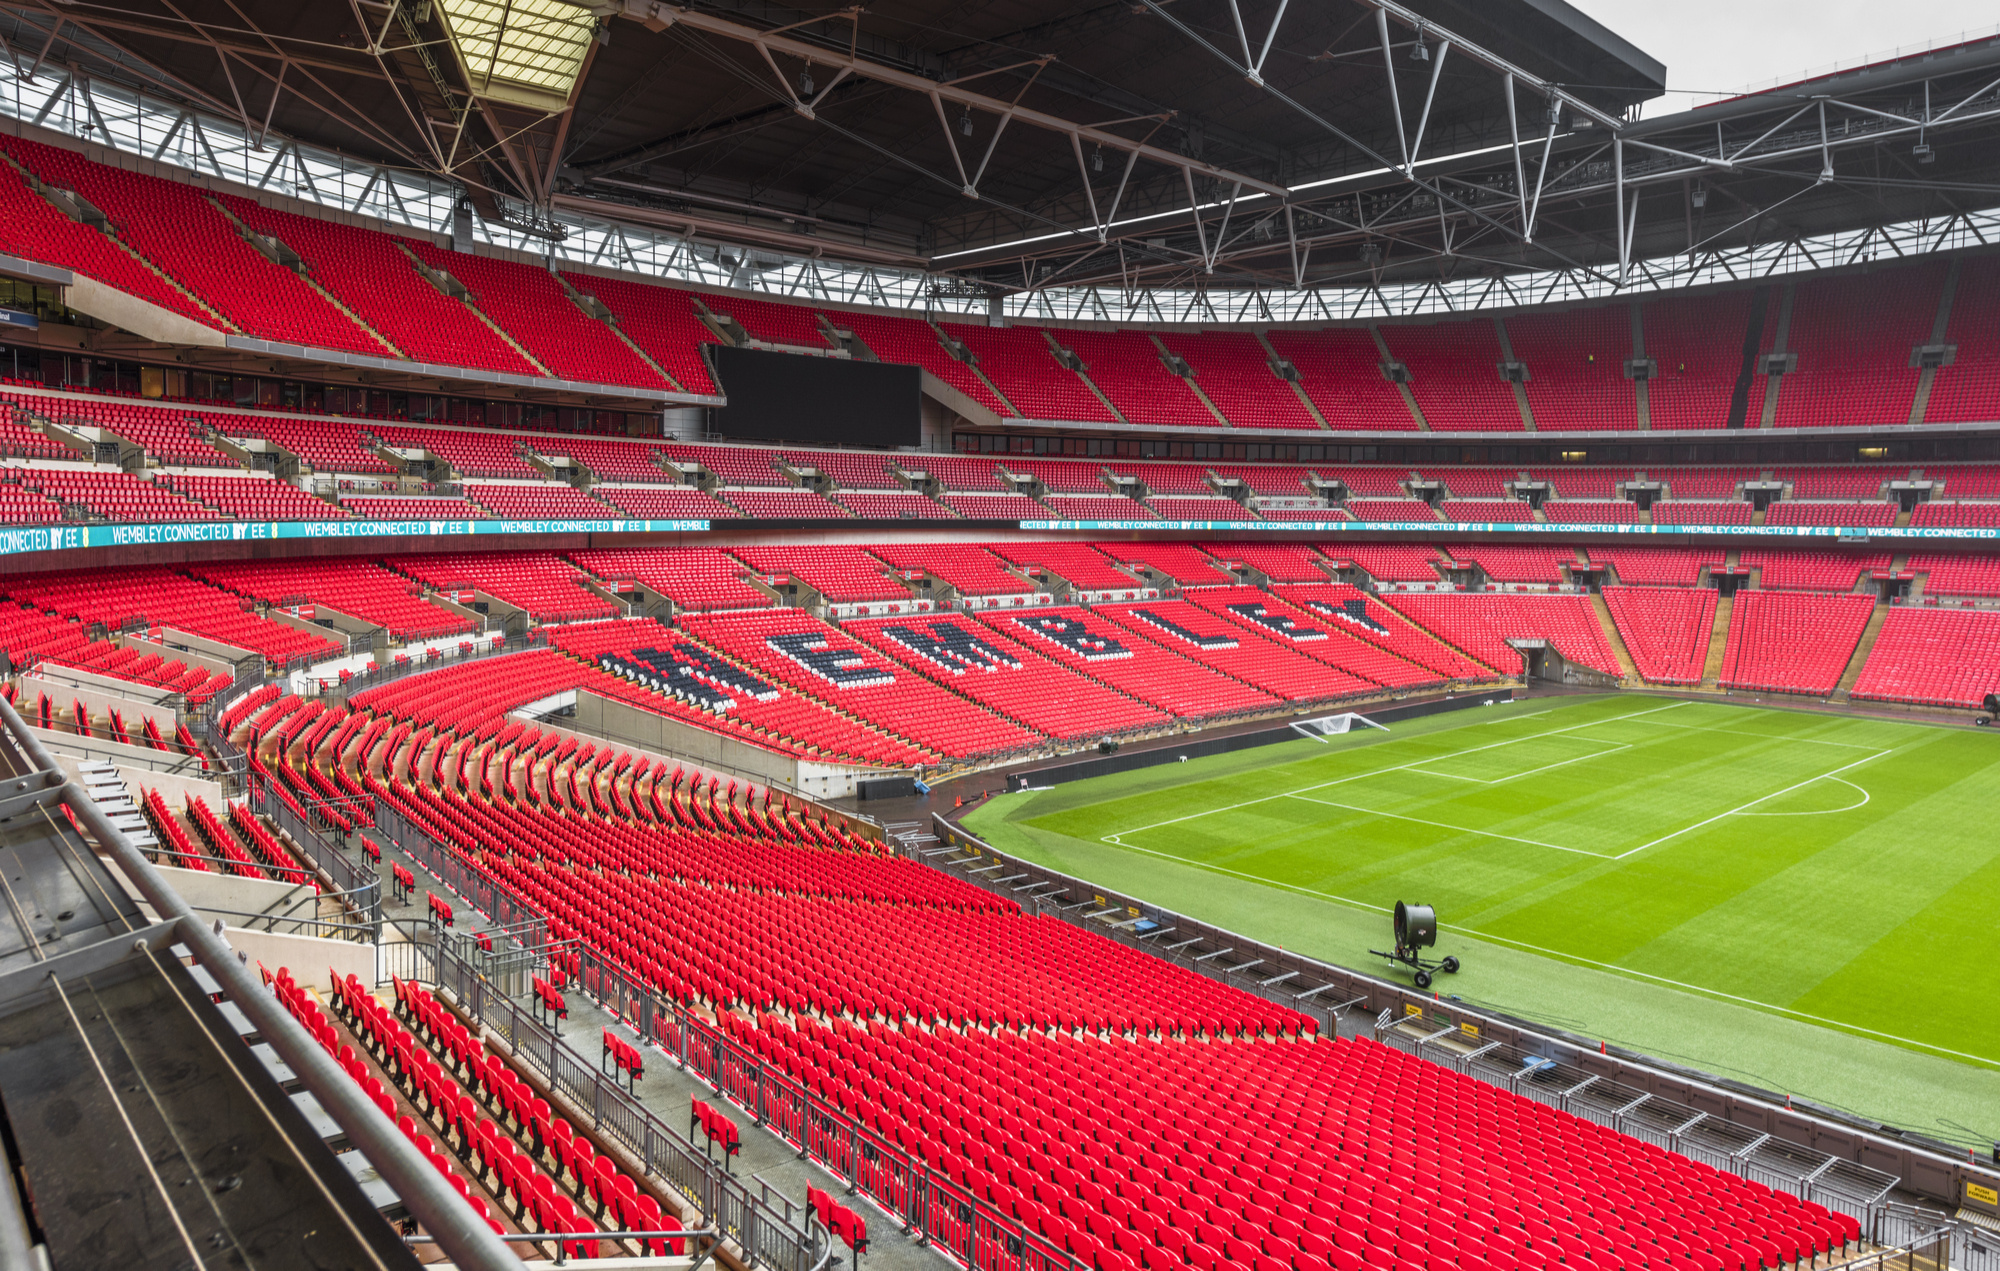 Wembley Stadium: Hosted many significant events over the years, from Olympic matches to FA cup finals. 2000x1280 HD Wallpaper.